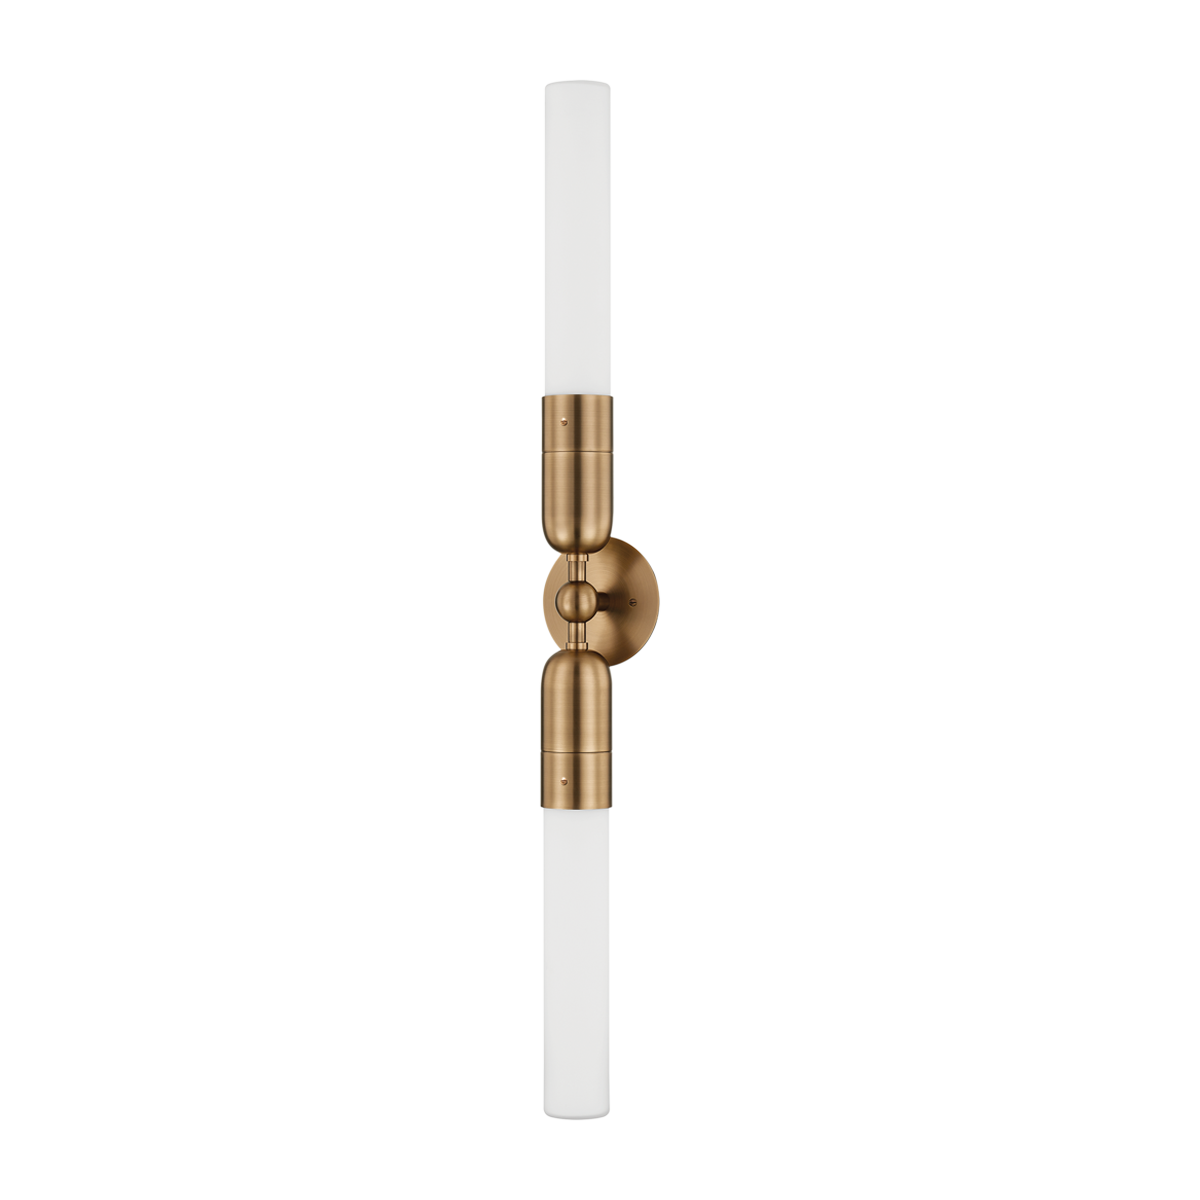 Troy Lighting Darby Wall Sconce Wall Sconce Troy Lighting PATINA BRASS 4.75x4.75x36.25 